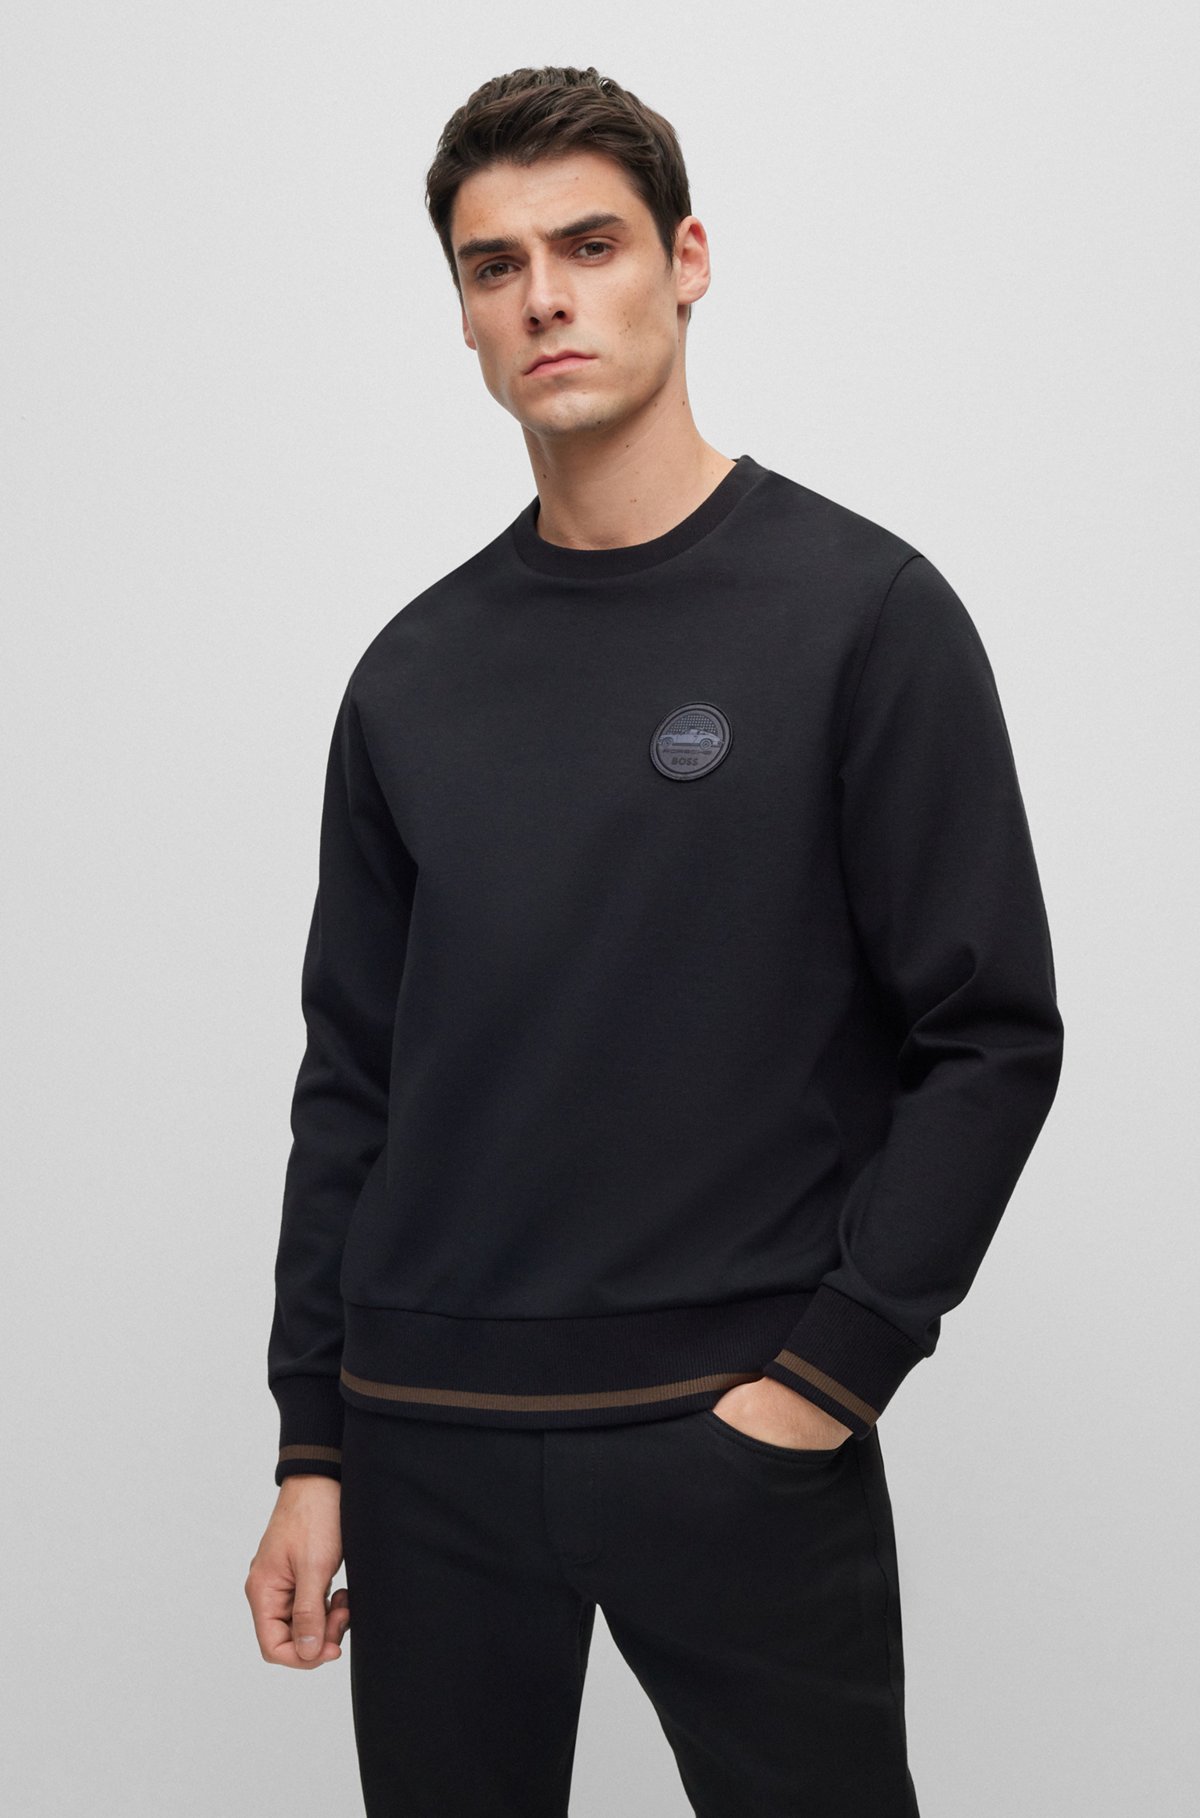 Porsche x BOSS relaxed-fit sweatshirt with capsule patch, Black